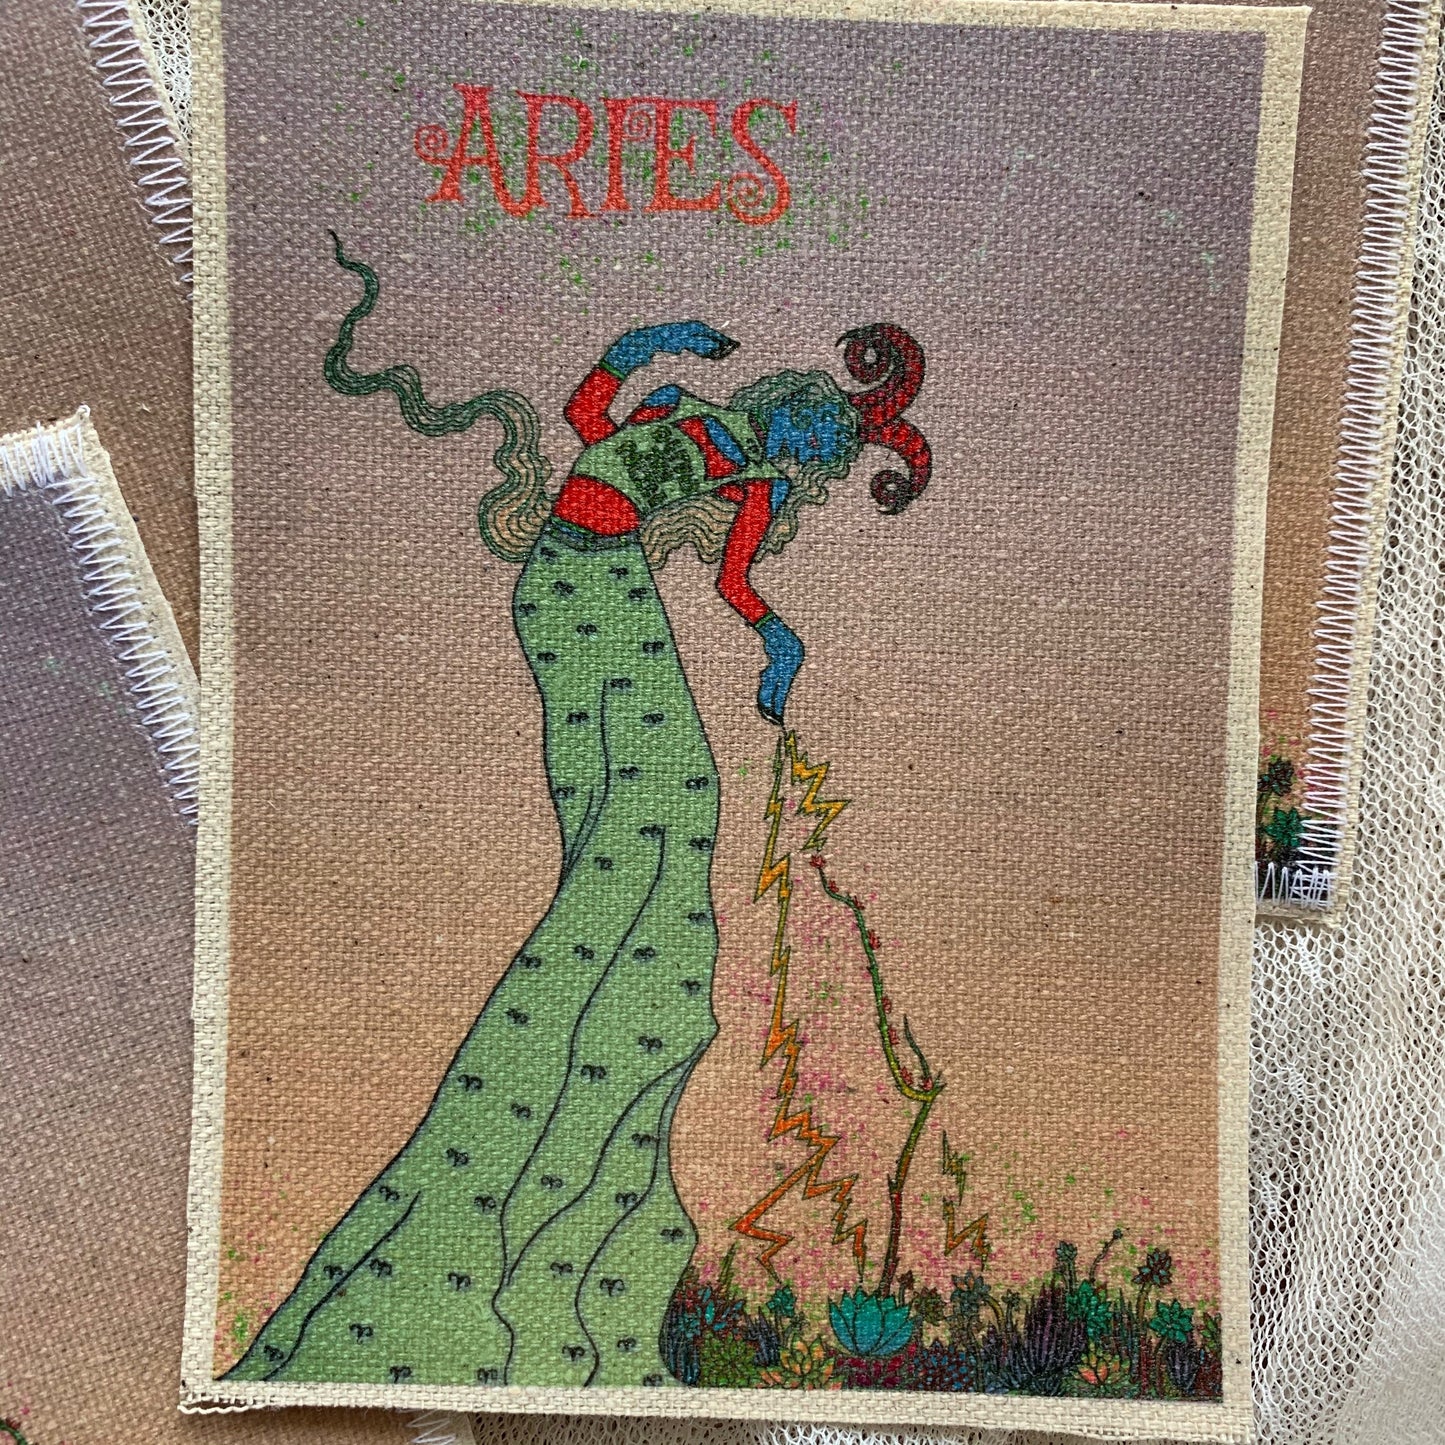 Aries Patch